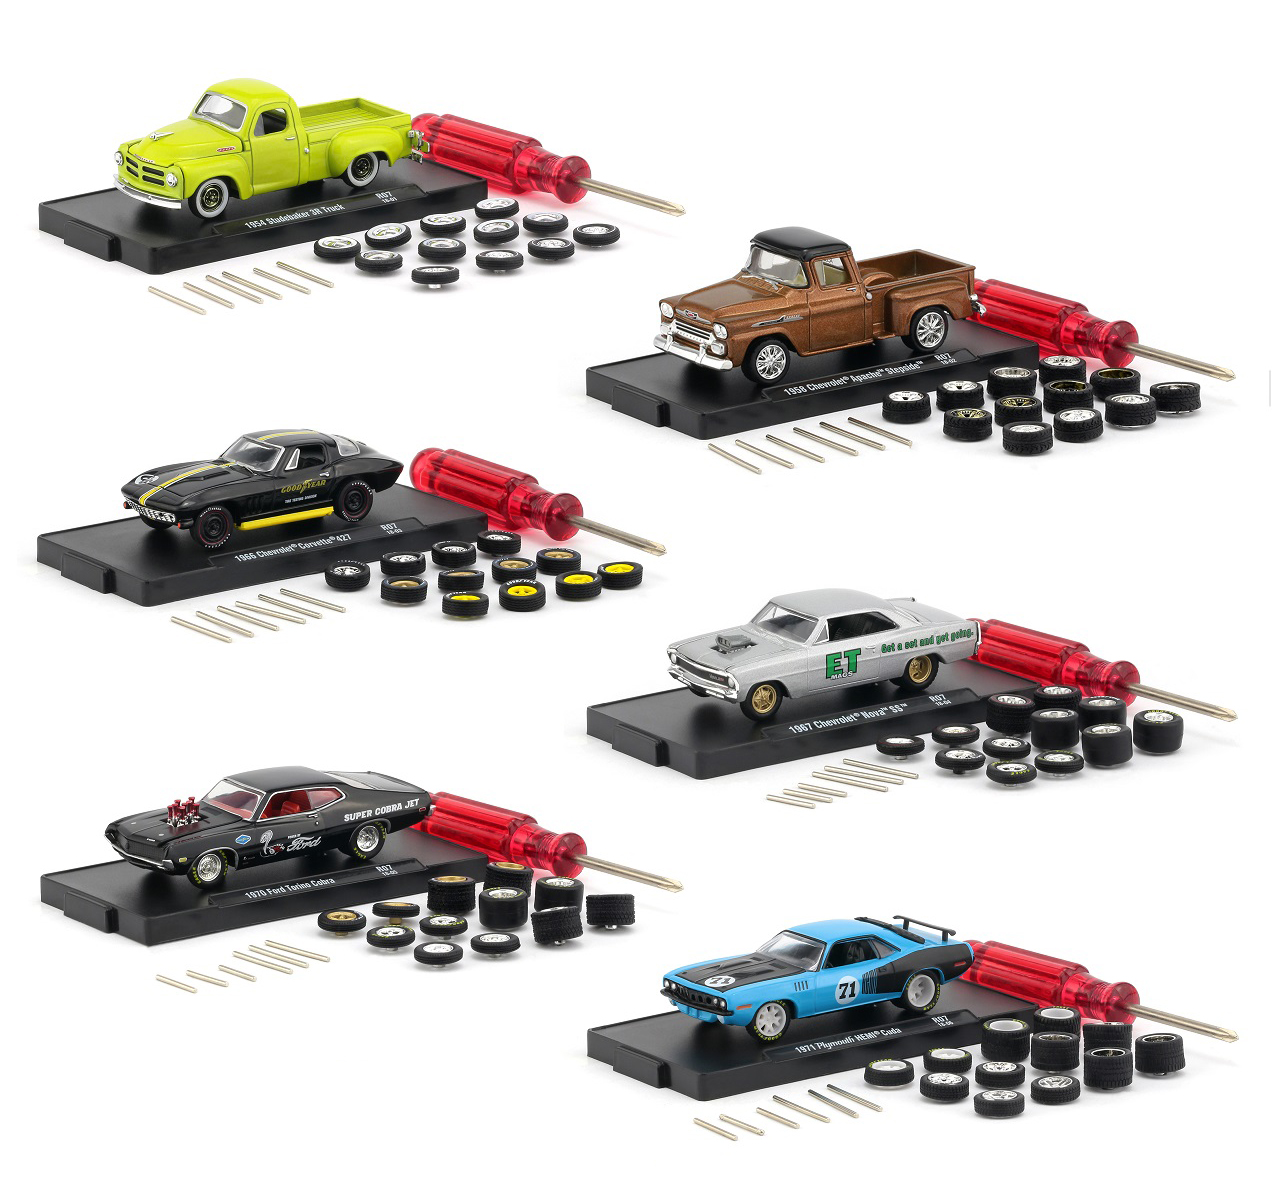 Auto Wheels Release 7 6 Cars Set In Blister Packs 1/64 Diecast Model Cars By M2 Machines